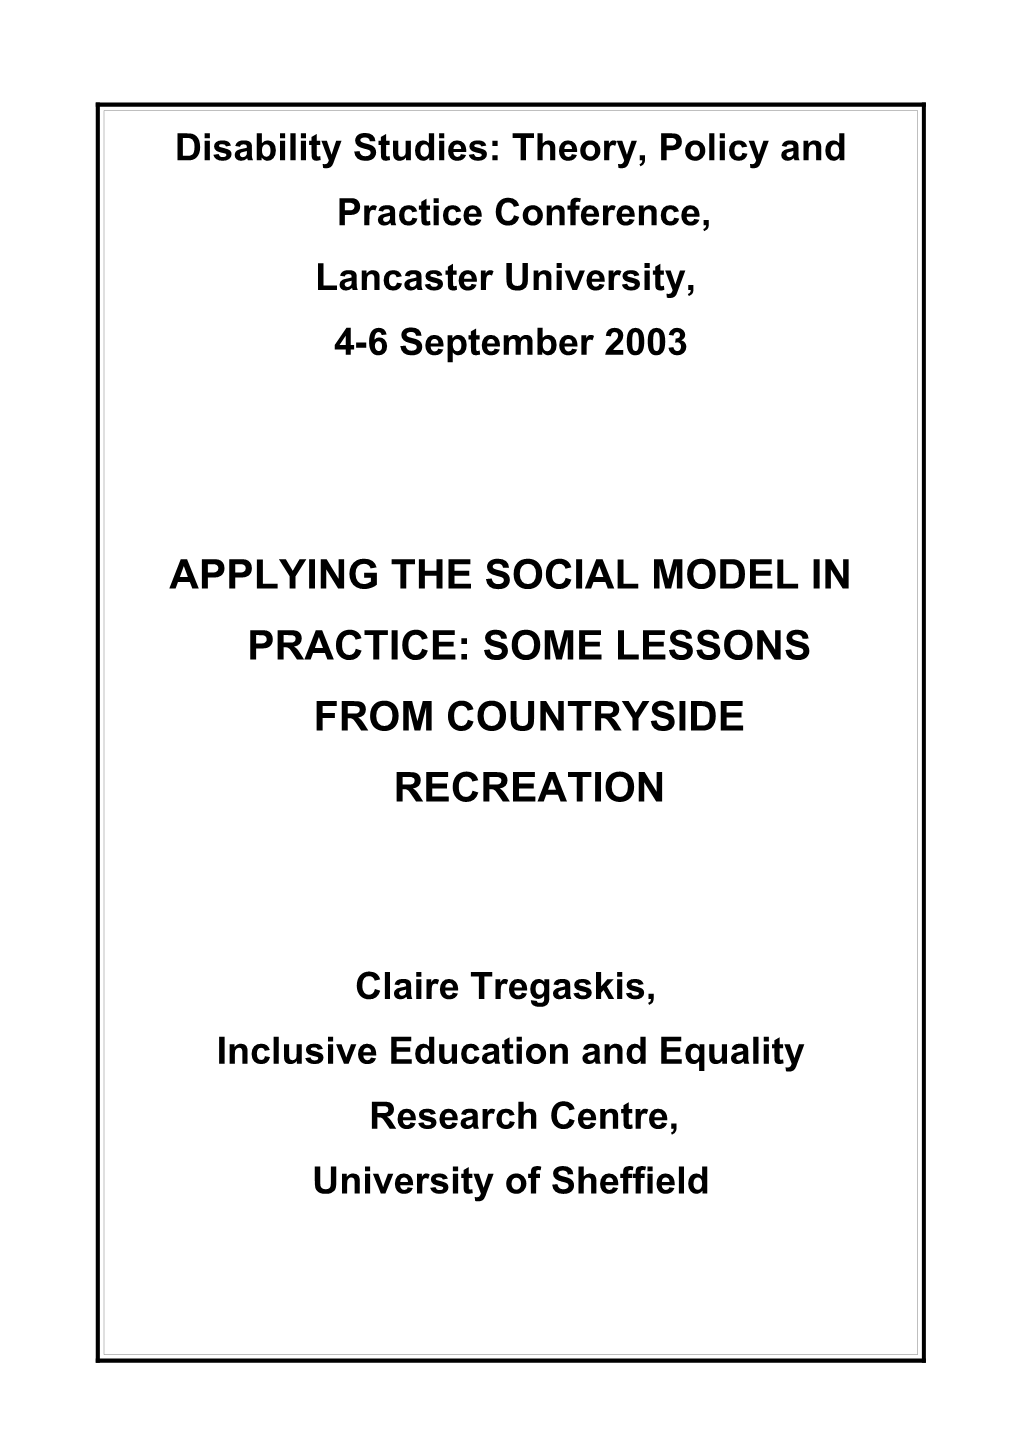 Applying the Social Model in Practice: Lessons from Countryside Recreation